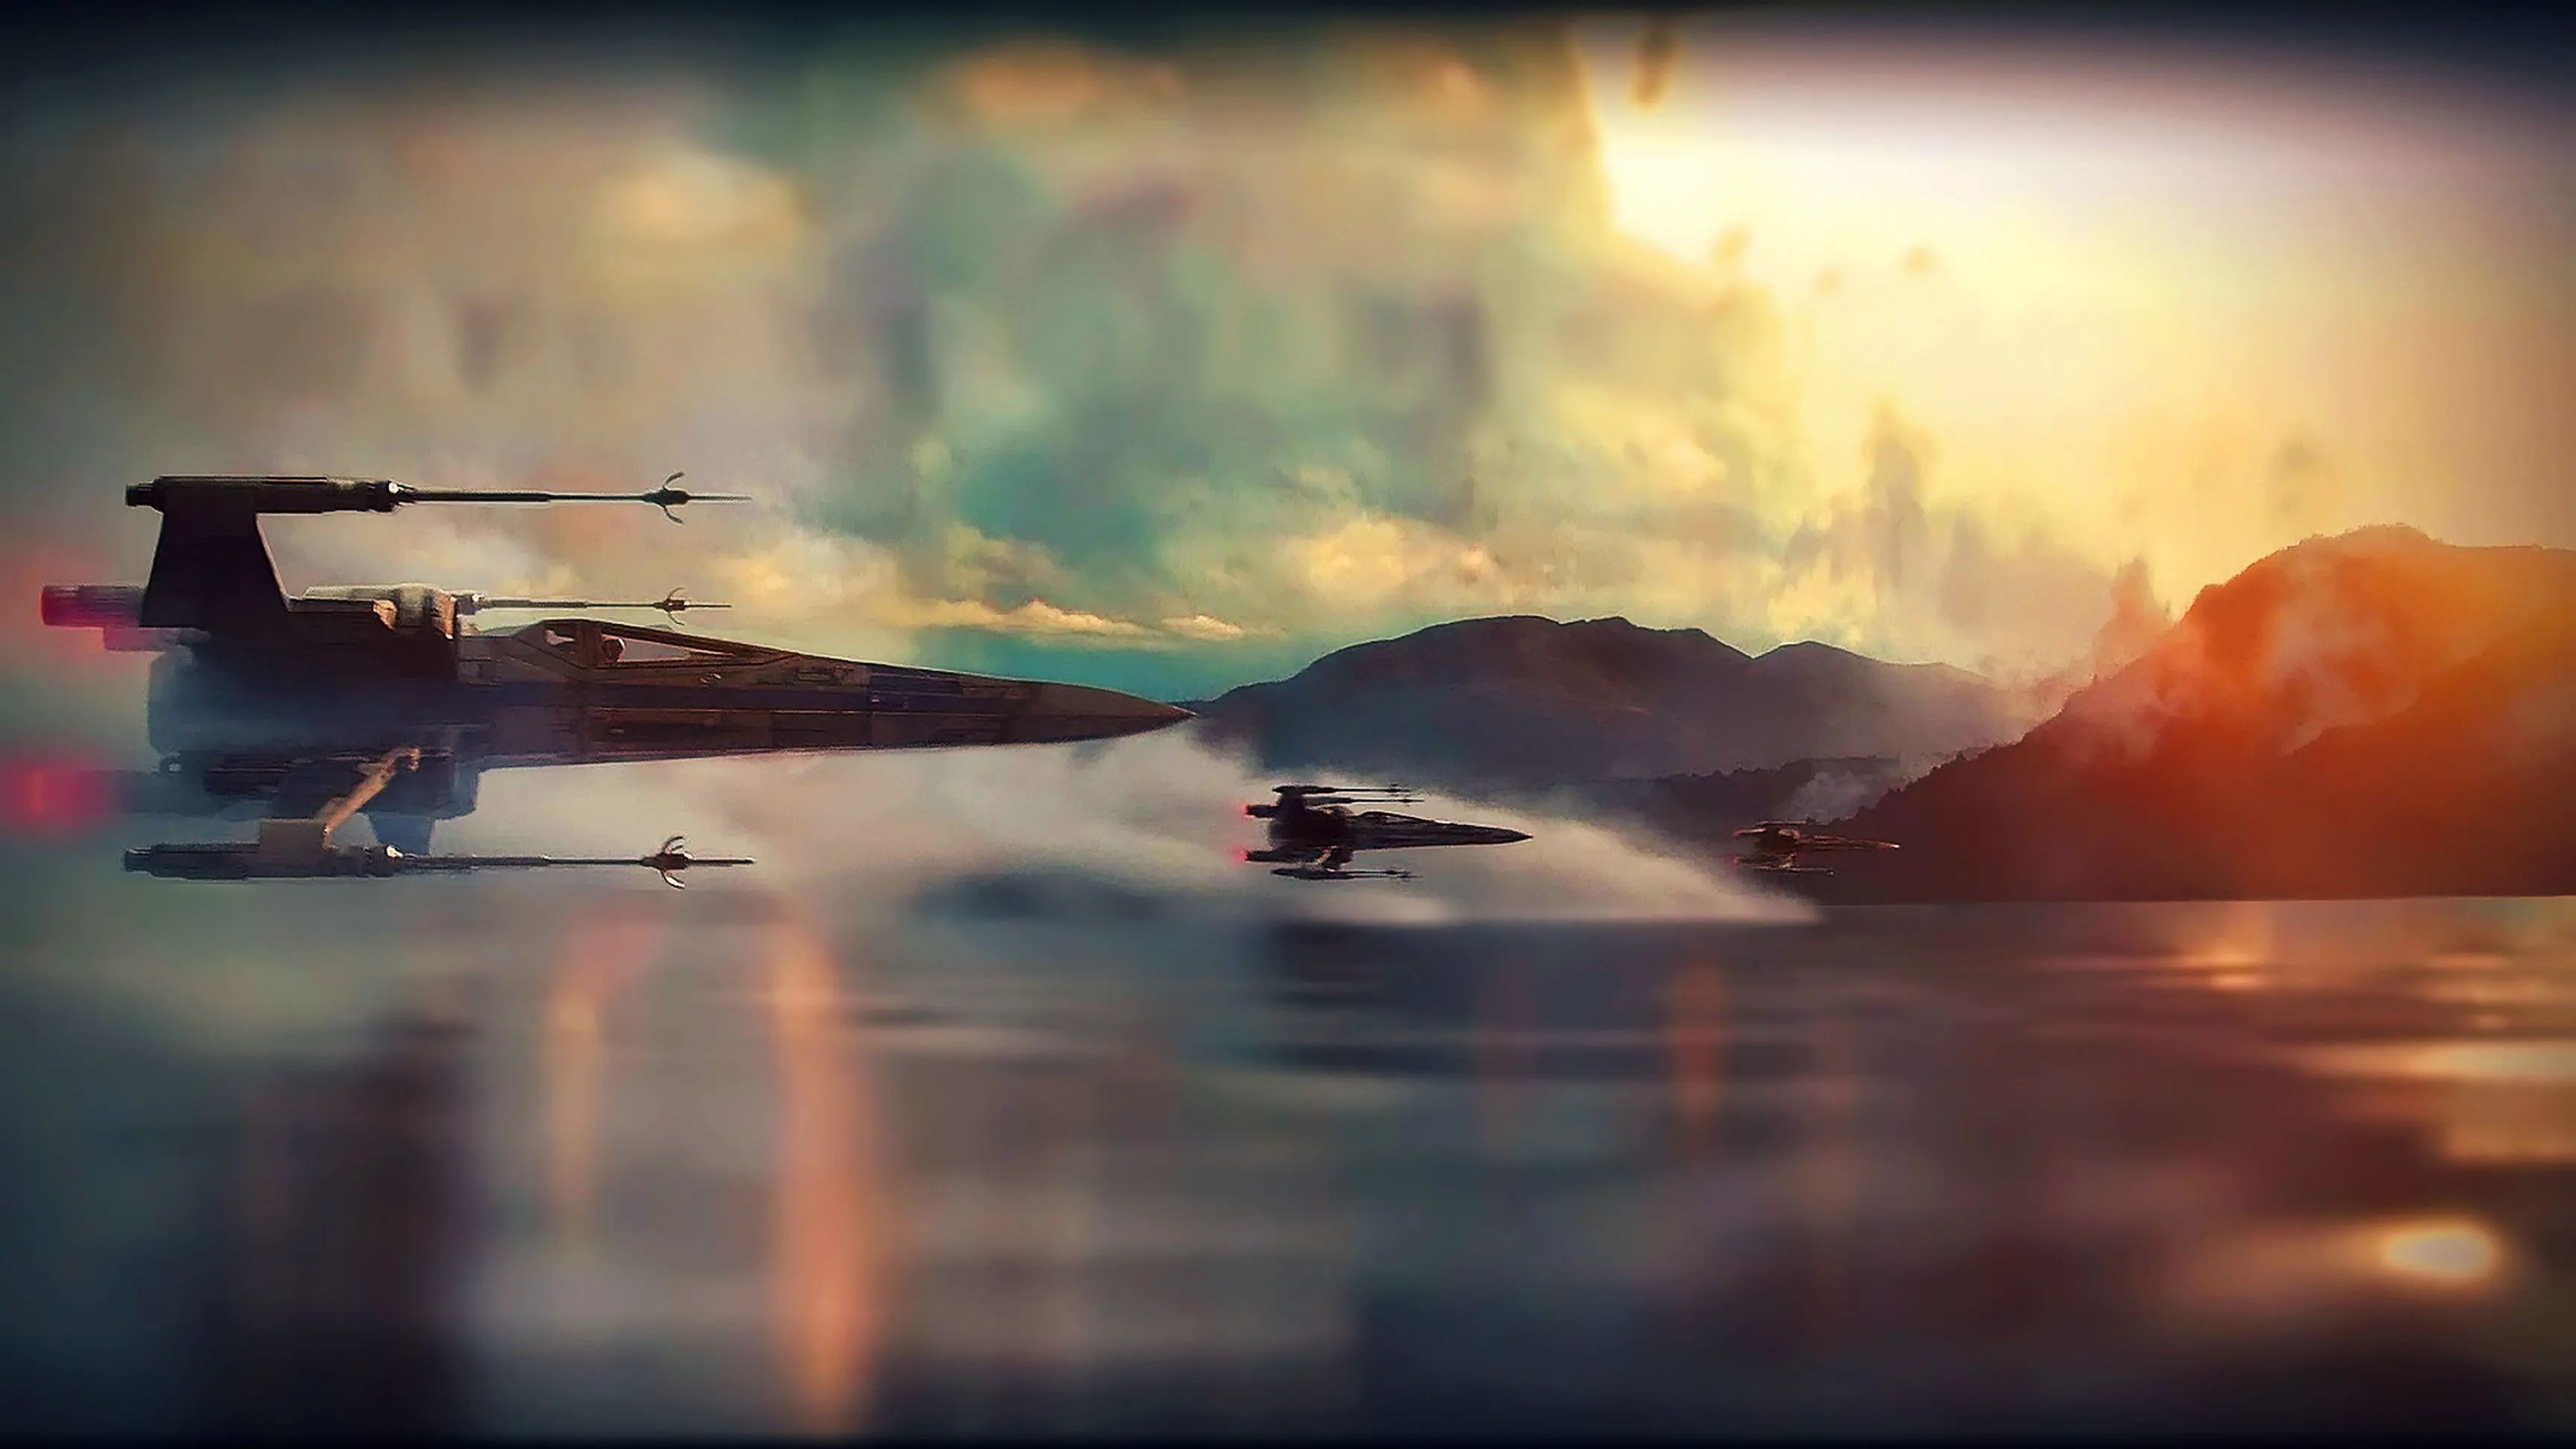 Movie Star Wars the Force Awakens wallpaper 6 | Background Image